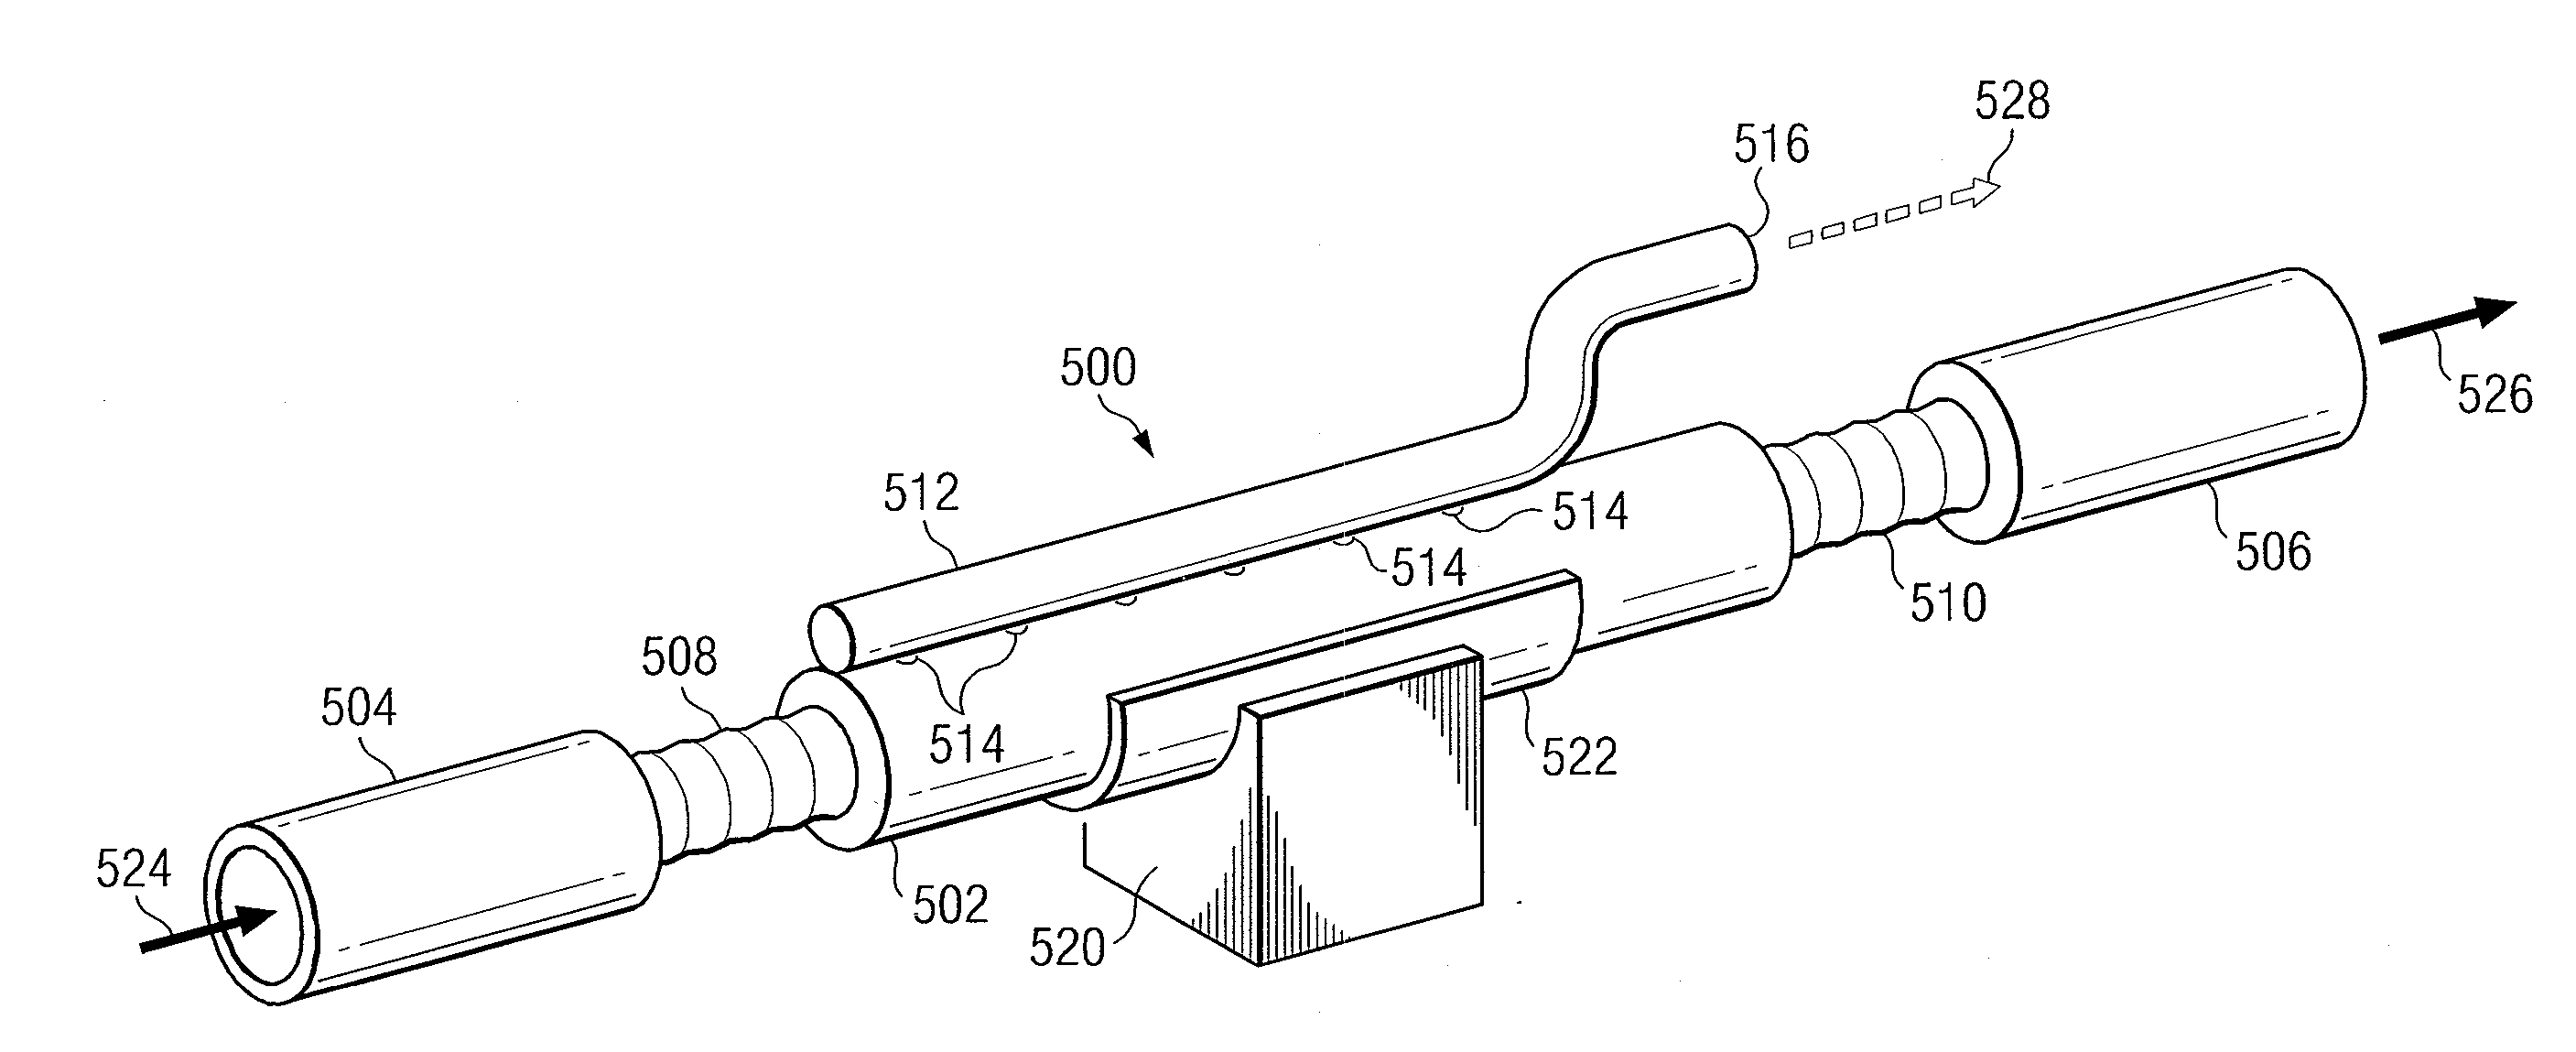 Cavitation Phase Separators for Steam-Based Generating Systems